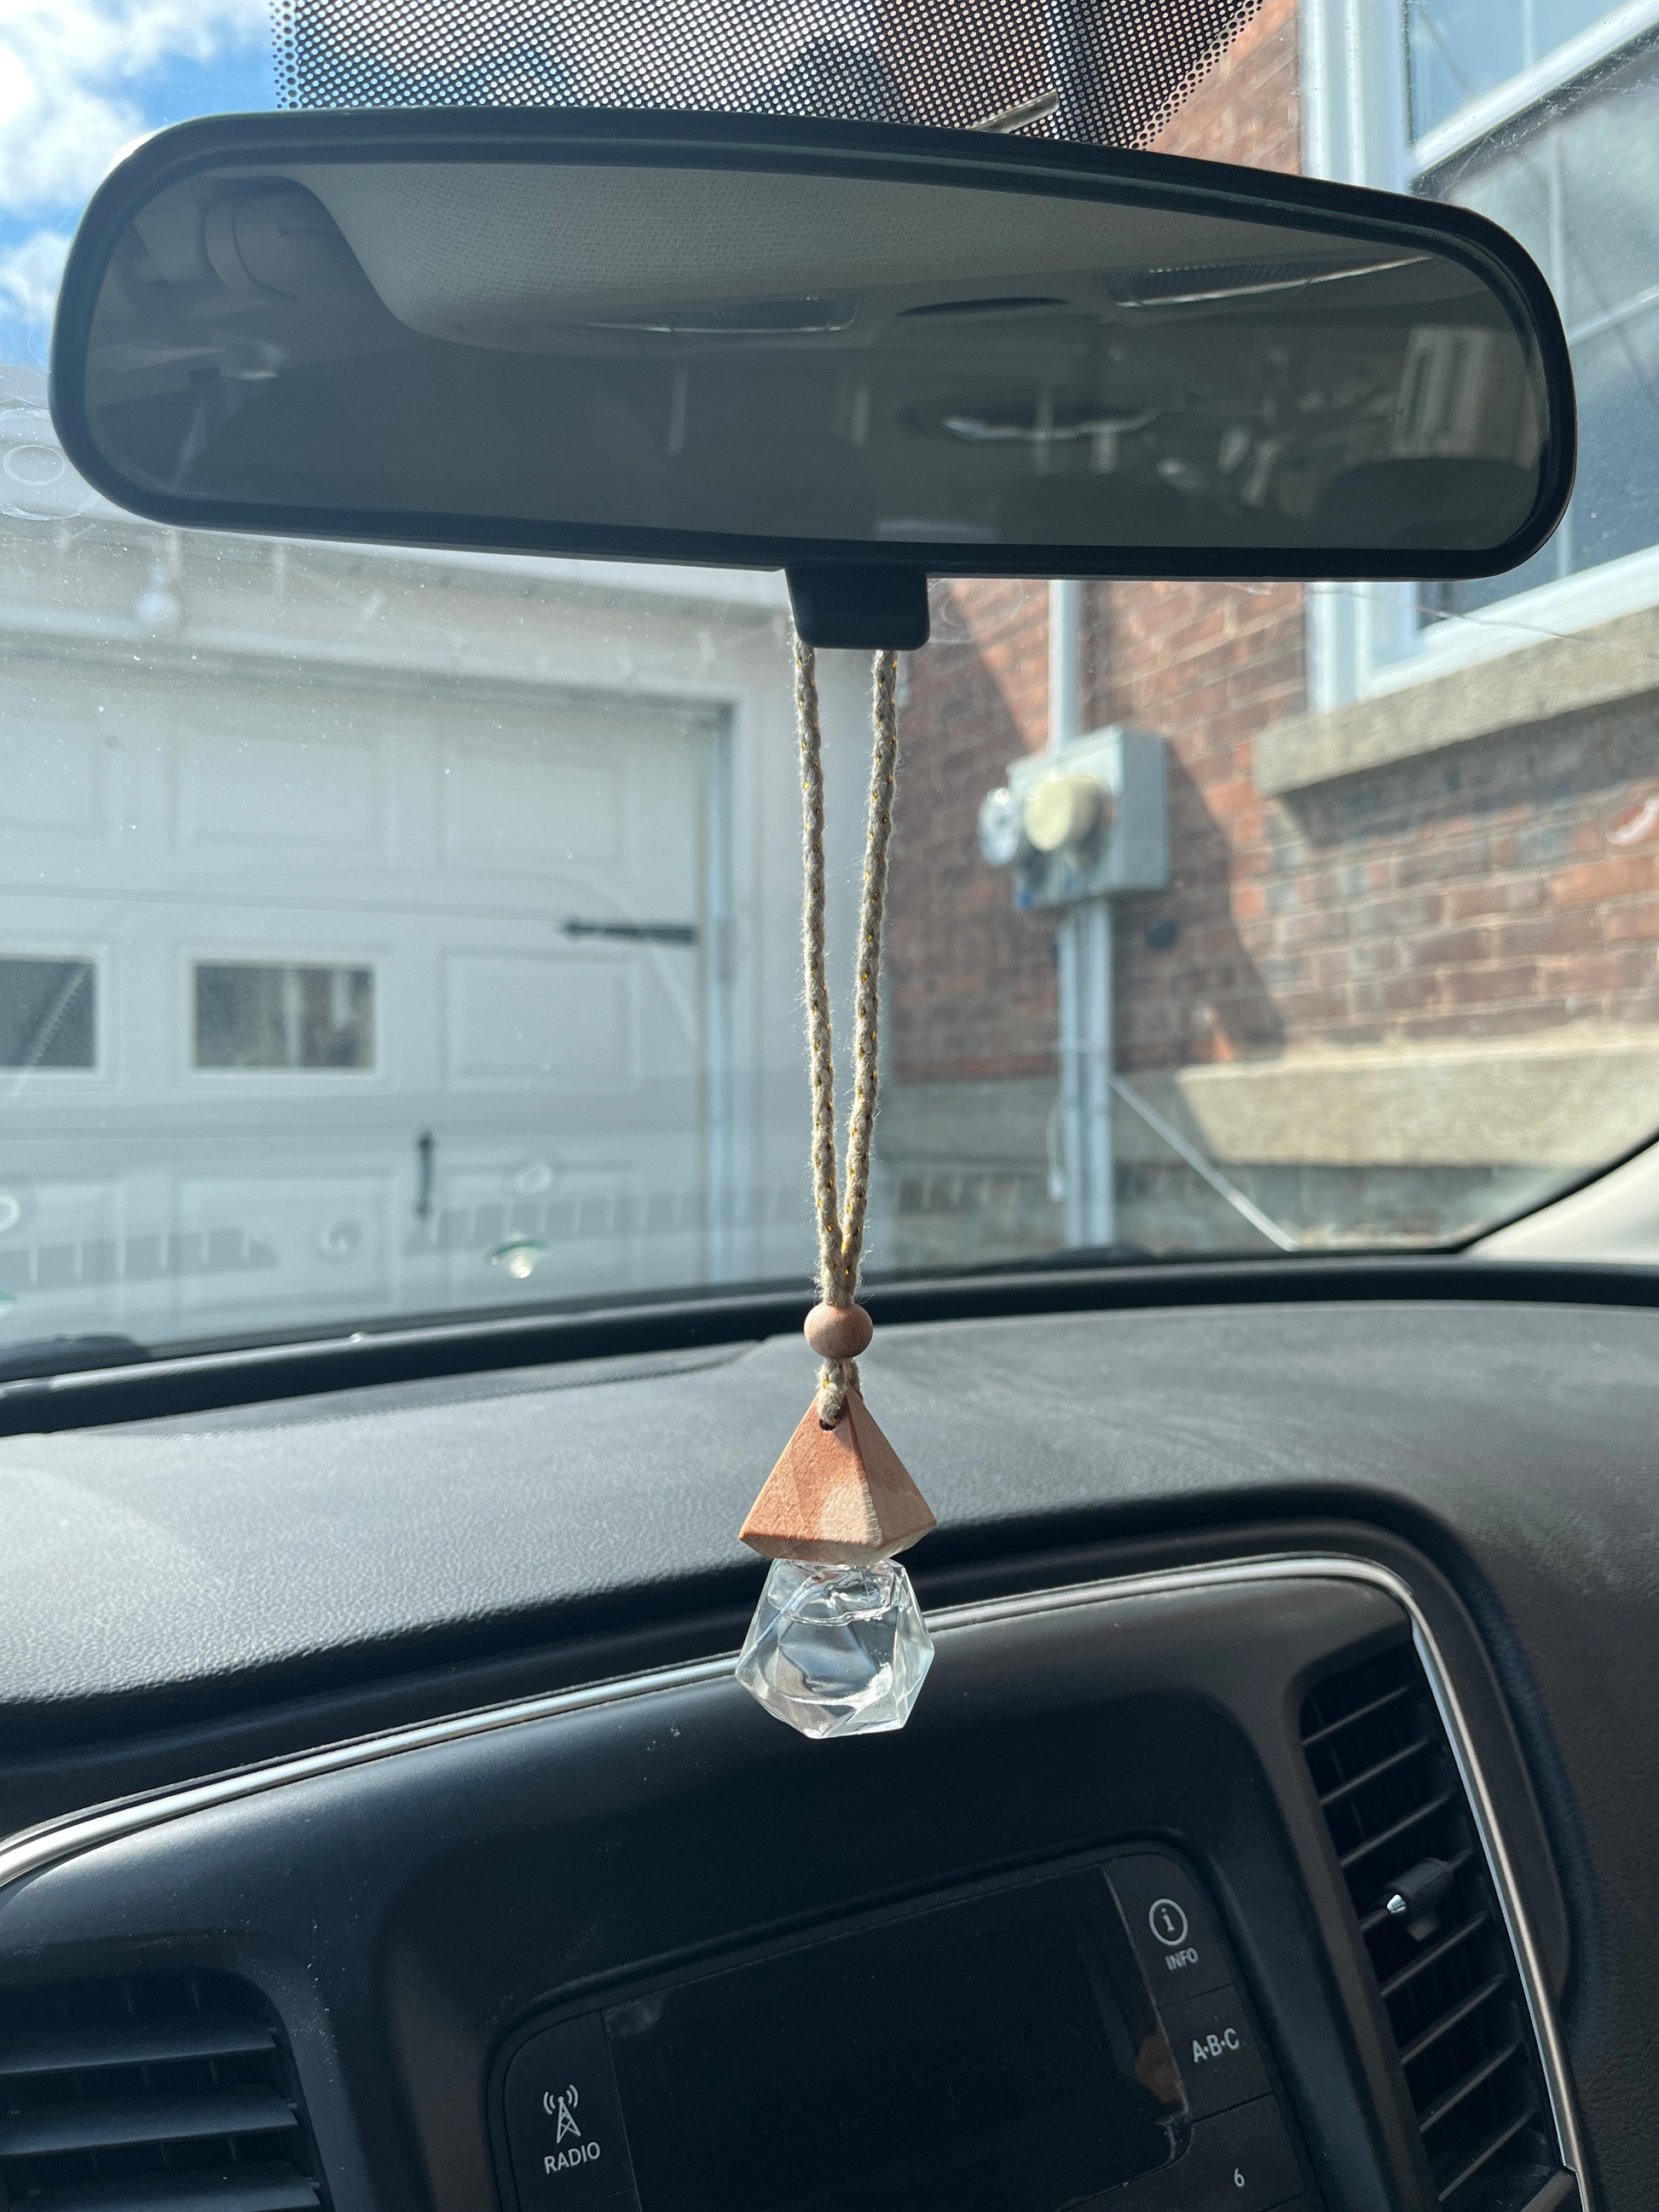 picture of car diffuser hanging on car mirror